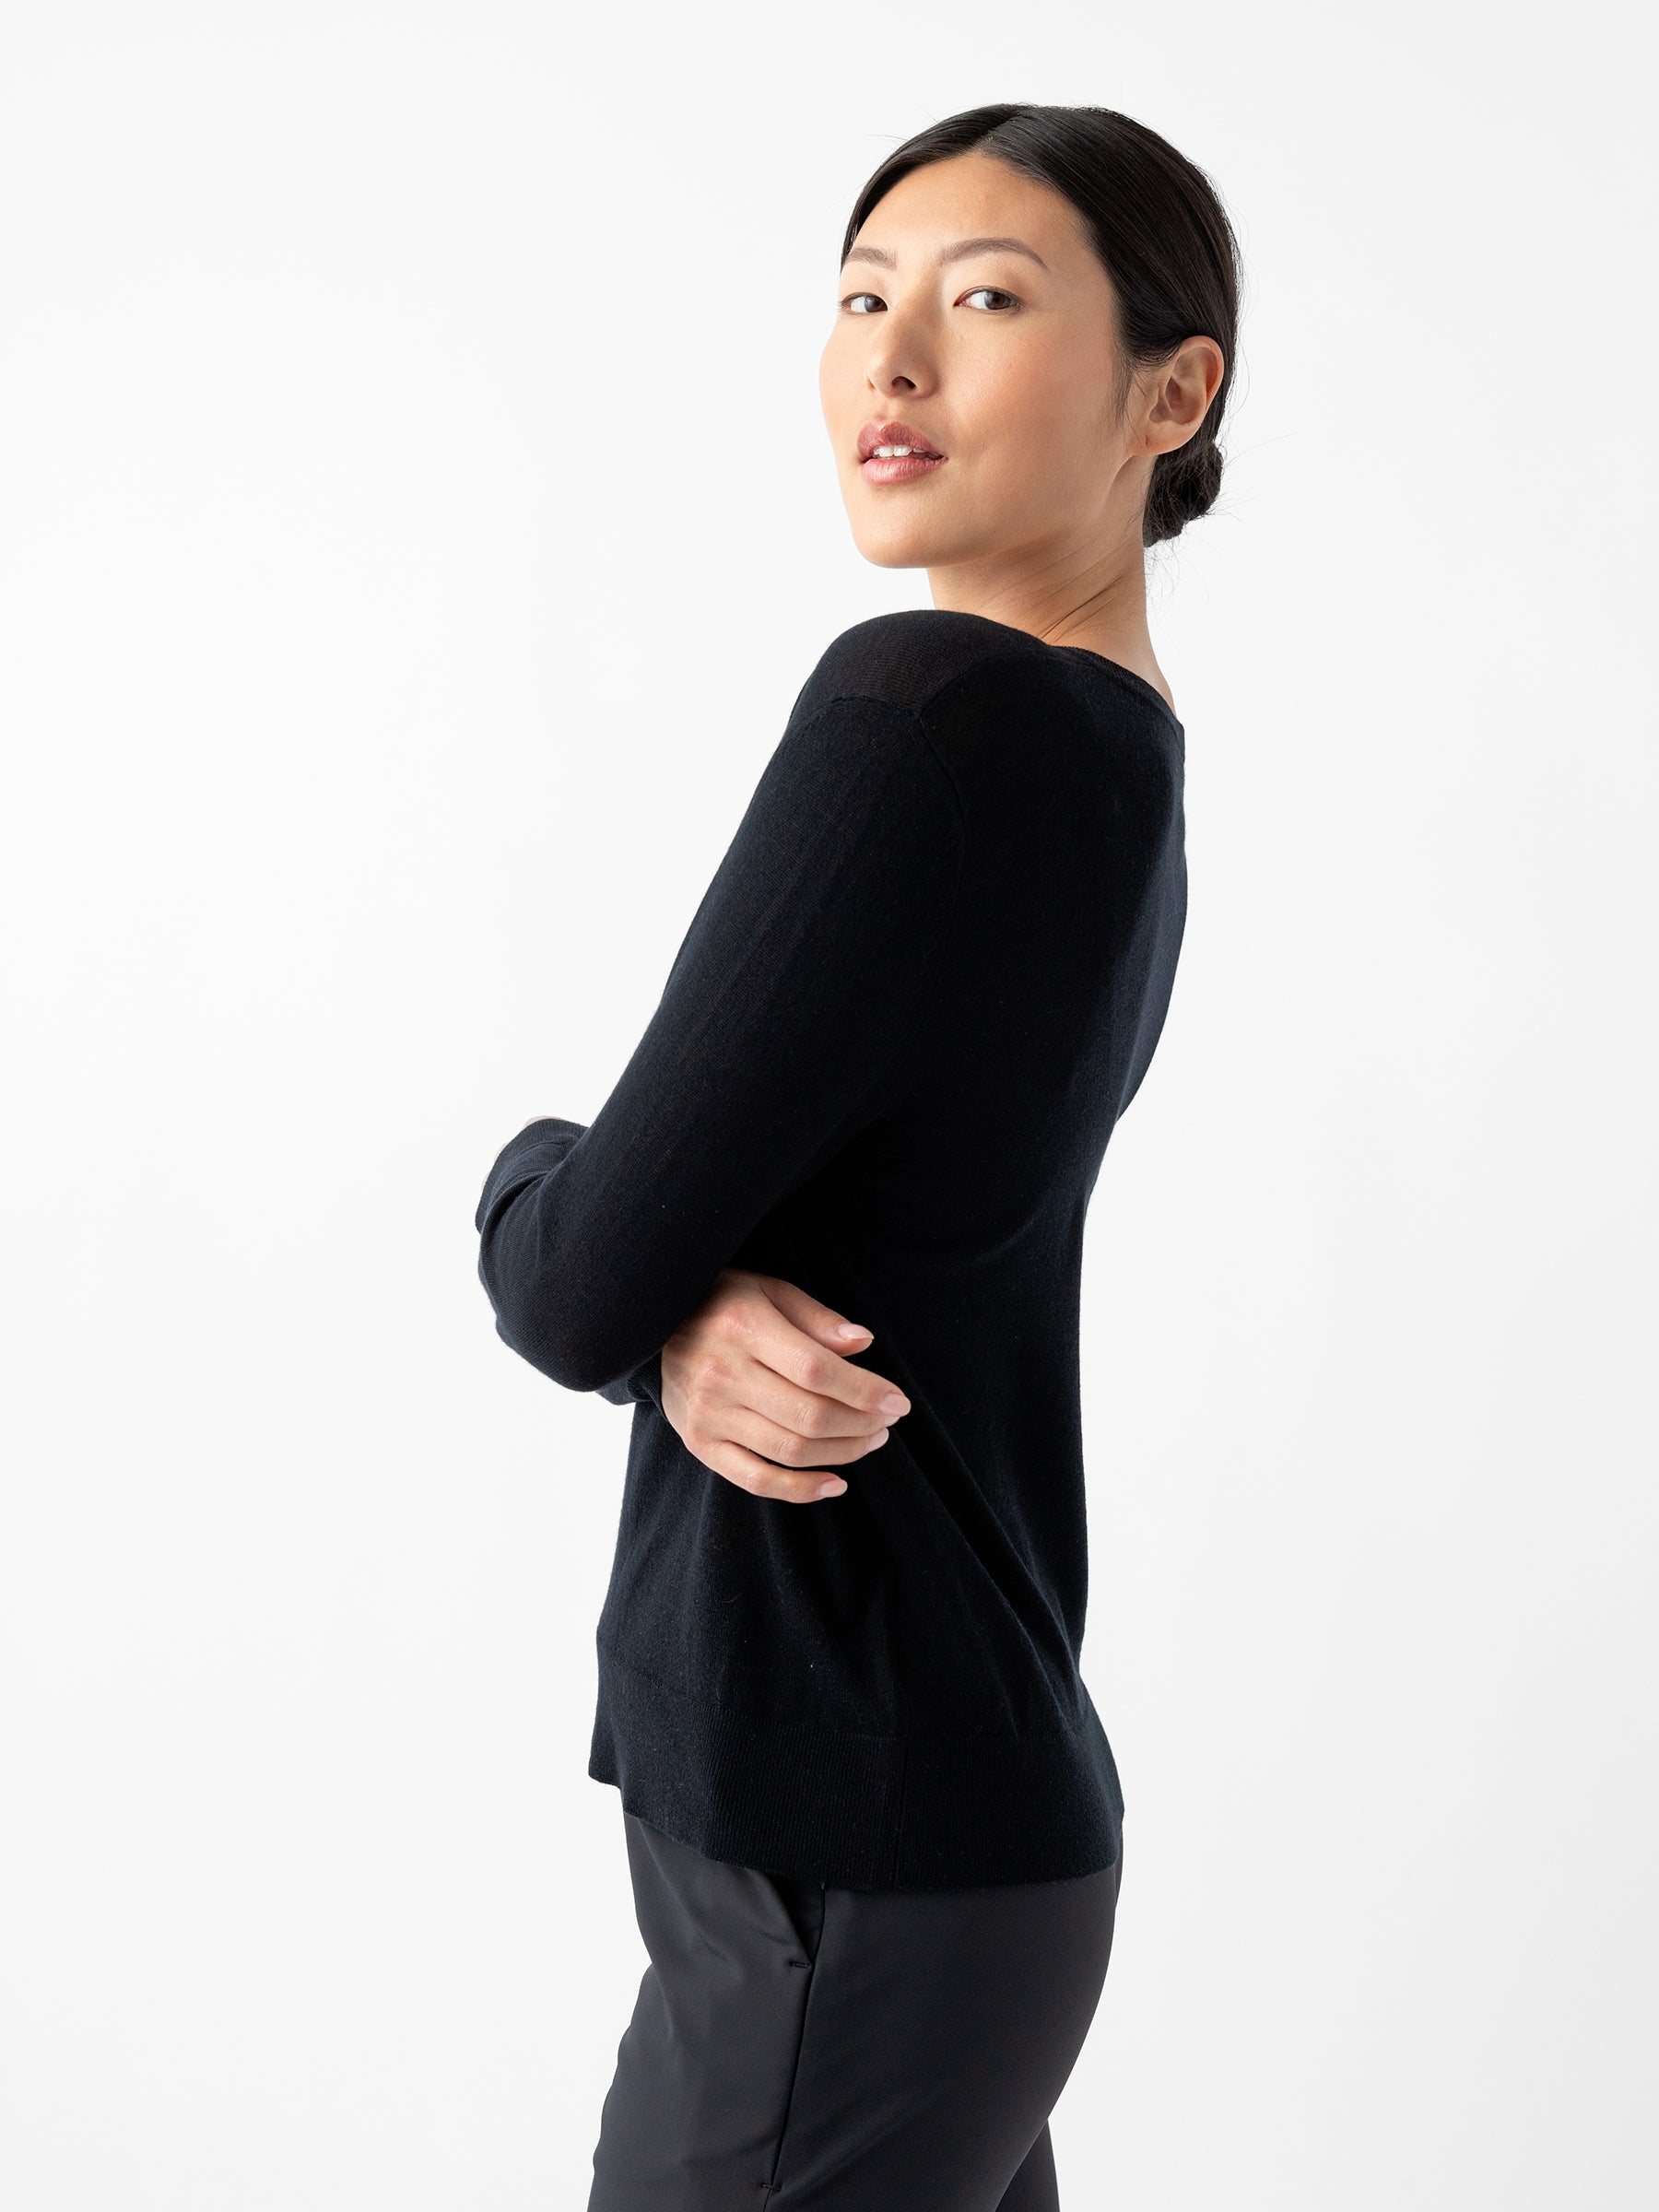 A woman with dark hair tied back wears the Women's AirKnit V-Neck Sweater by Cozy Earth, paired with black pants. She stands sideways, looking over her shoulder towards the camera against a plain white background. |Color:Jet Black